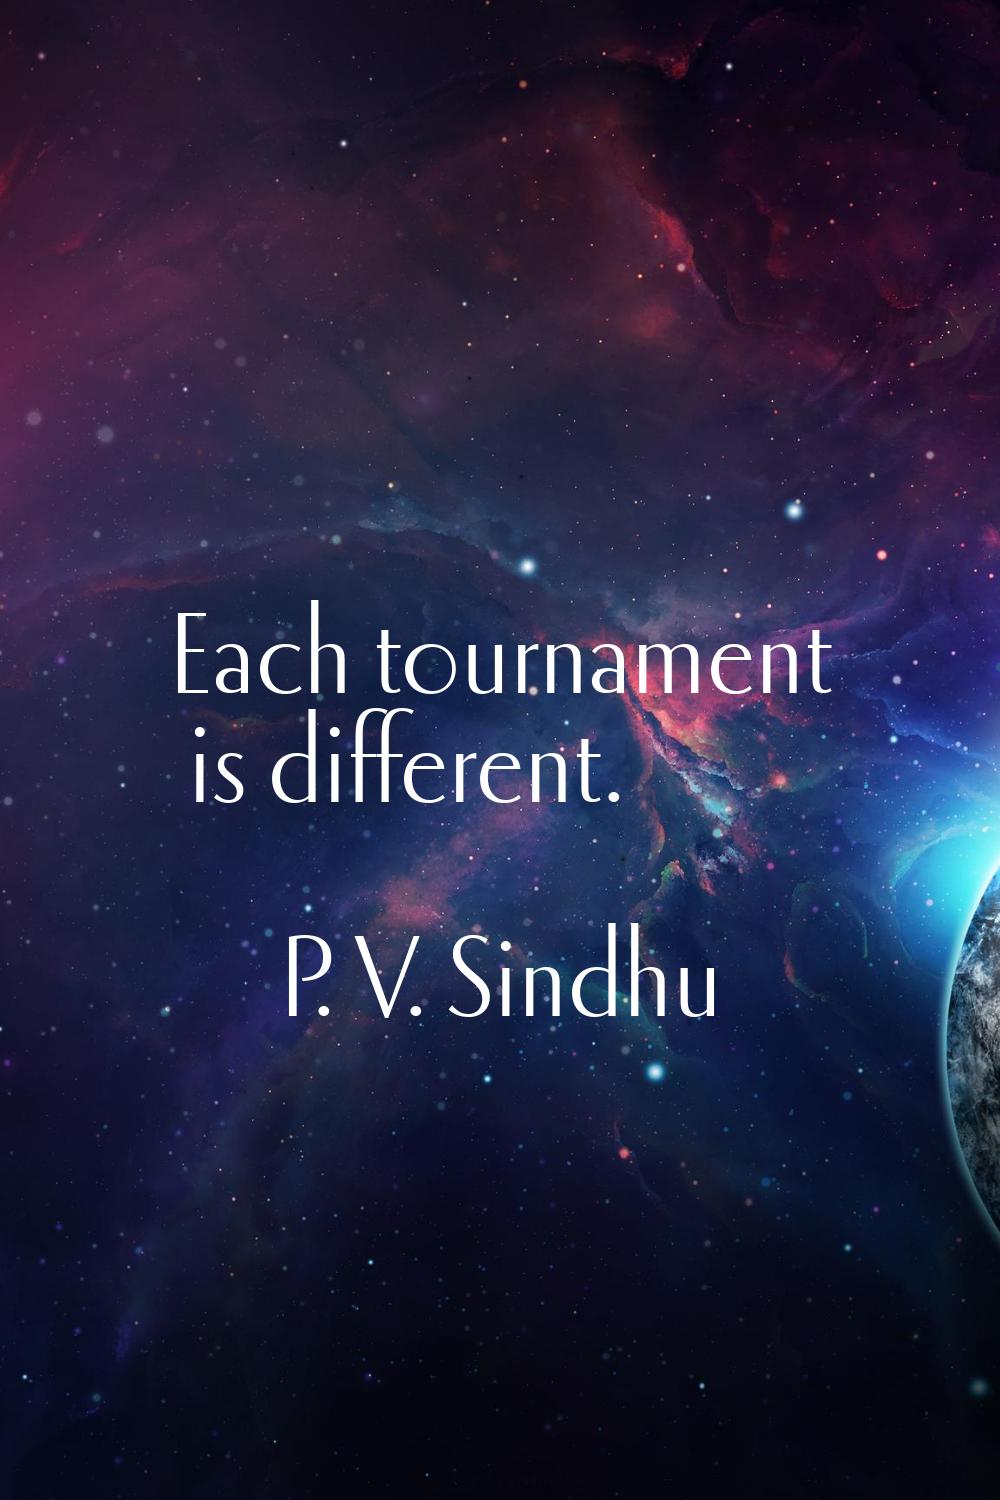 Each tournament is different.